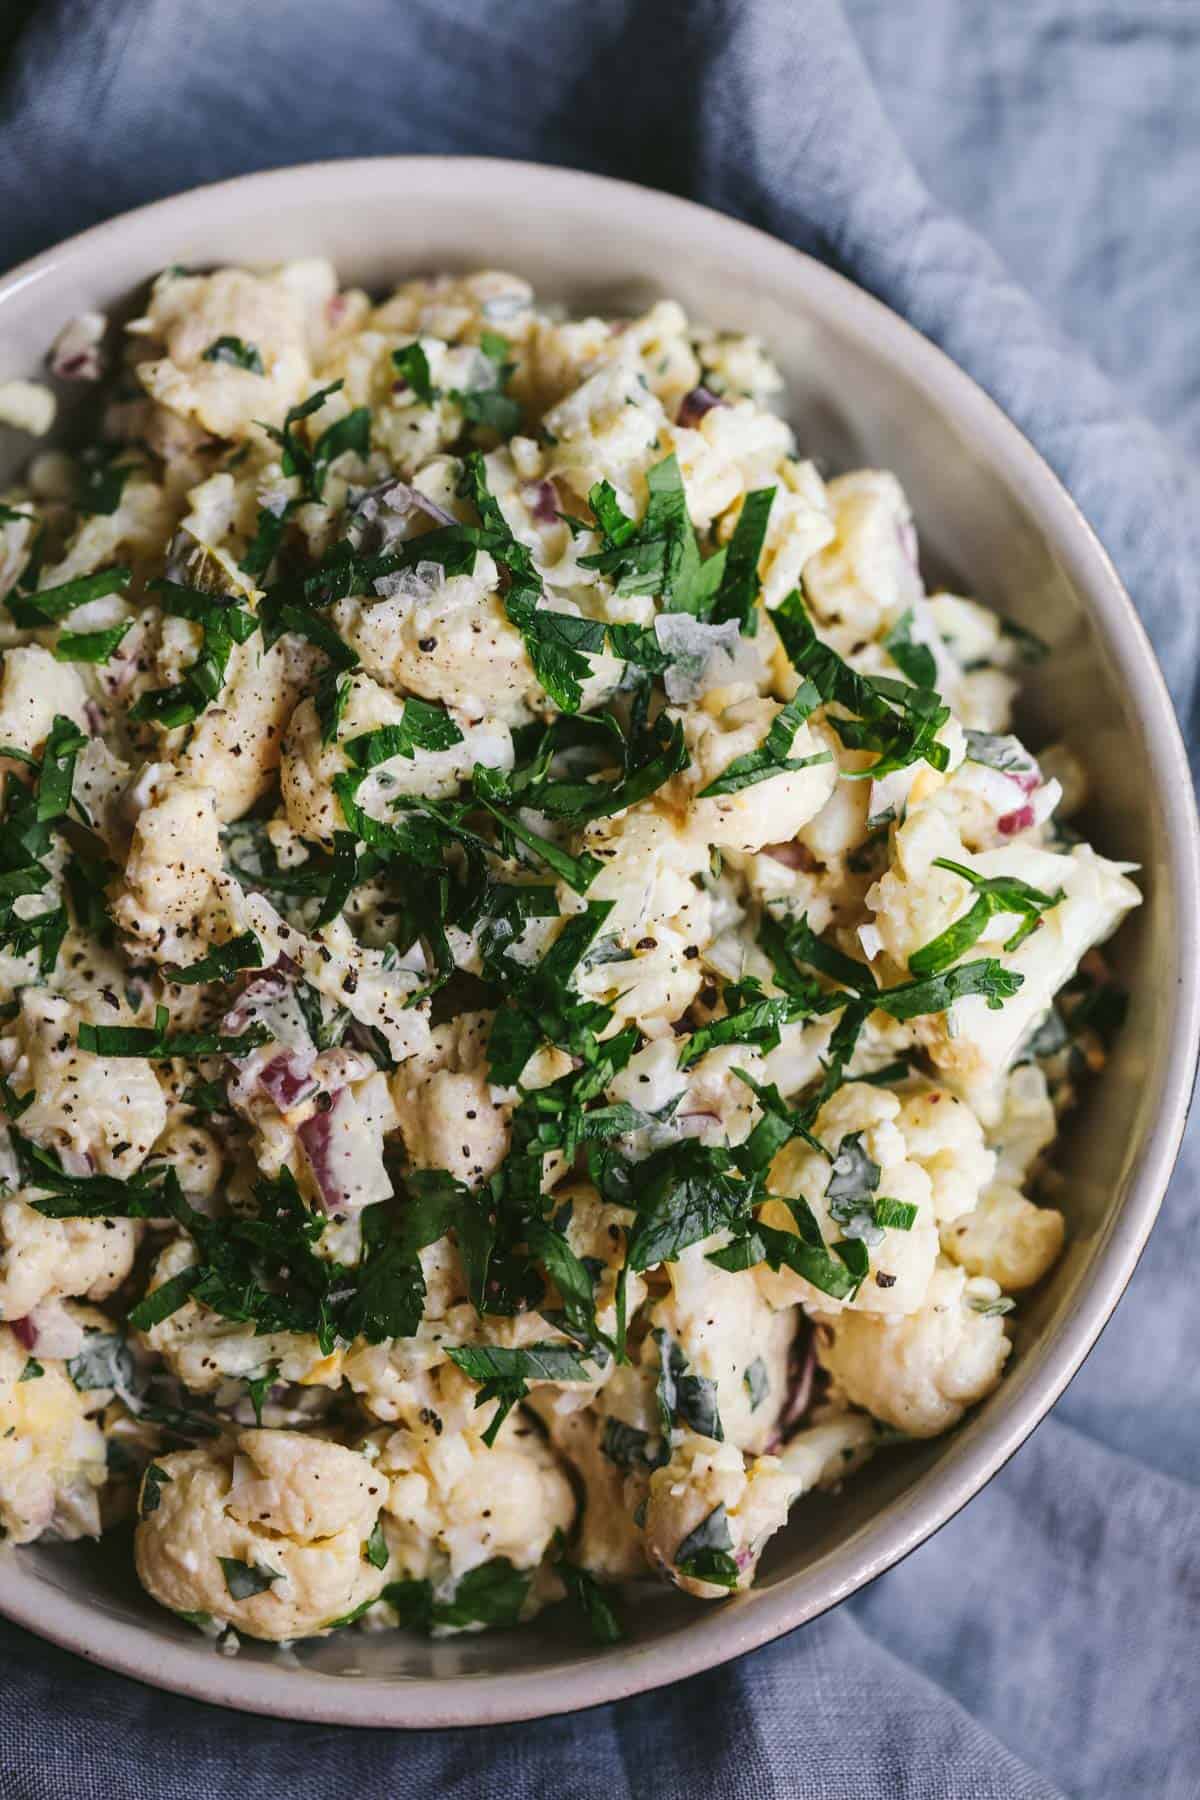 The Best Keto Side Dishes